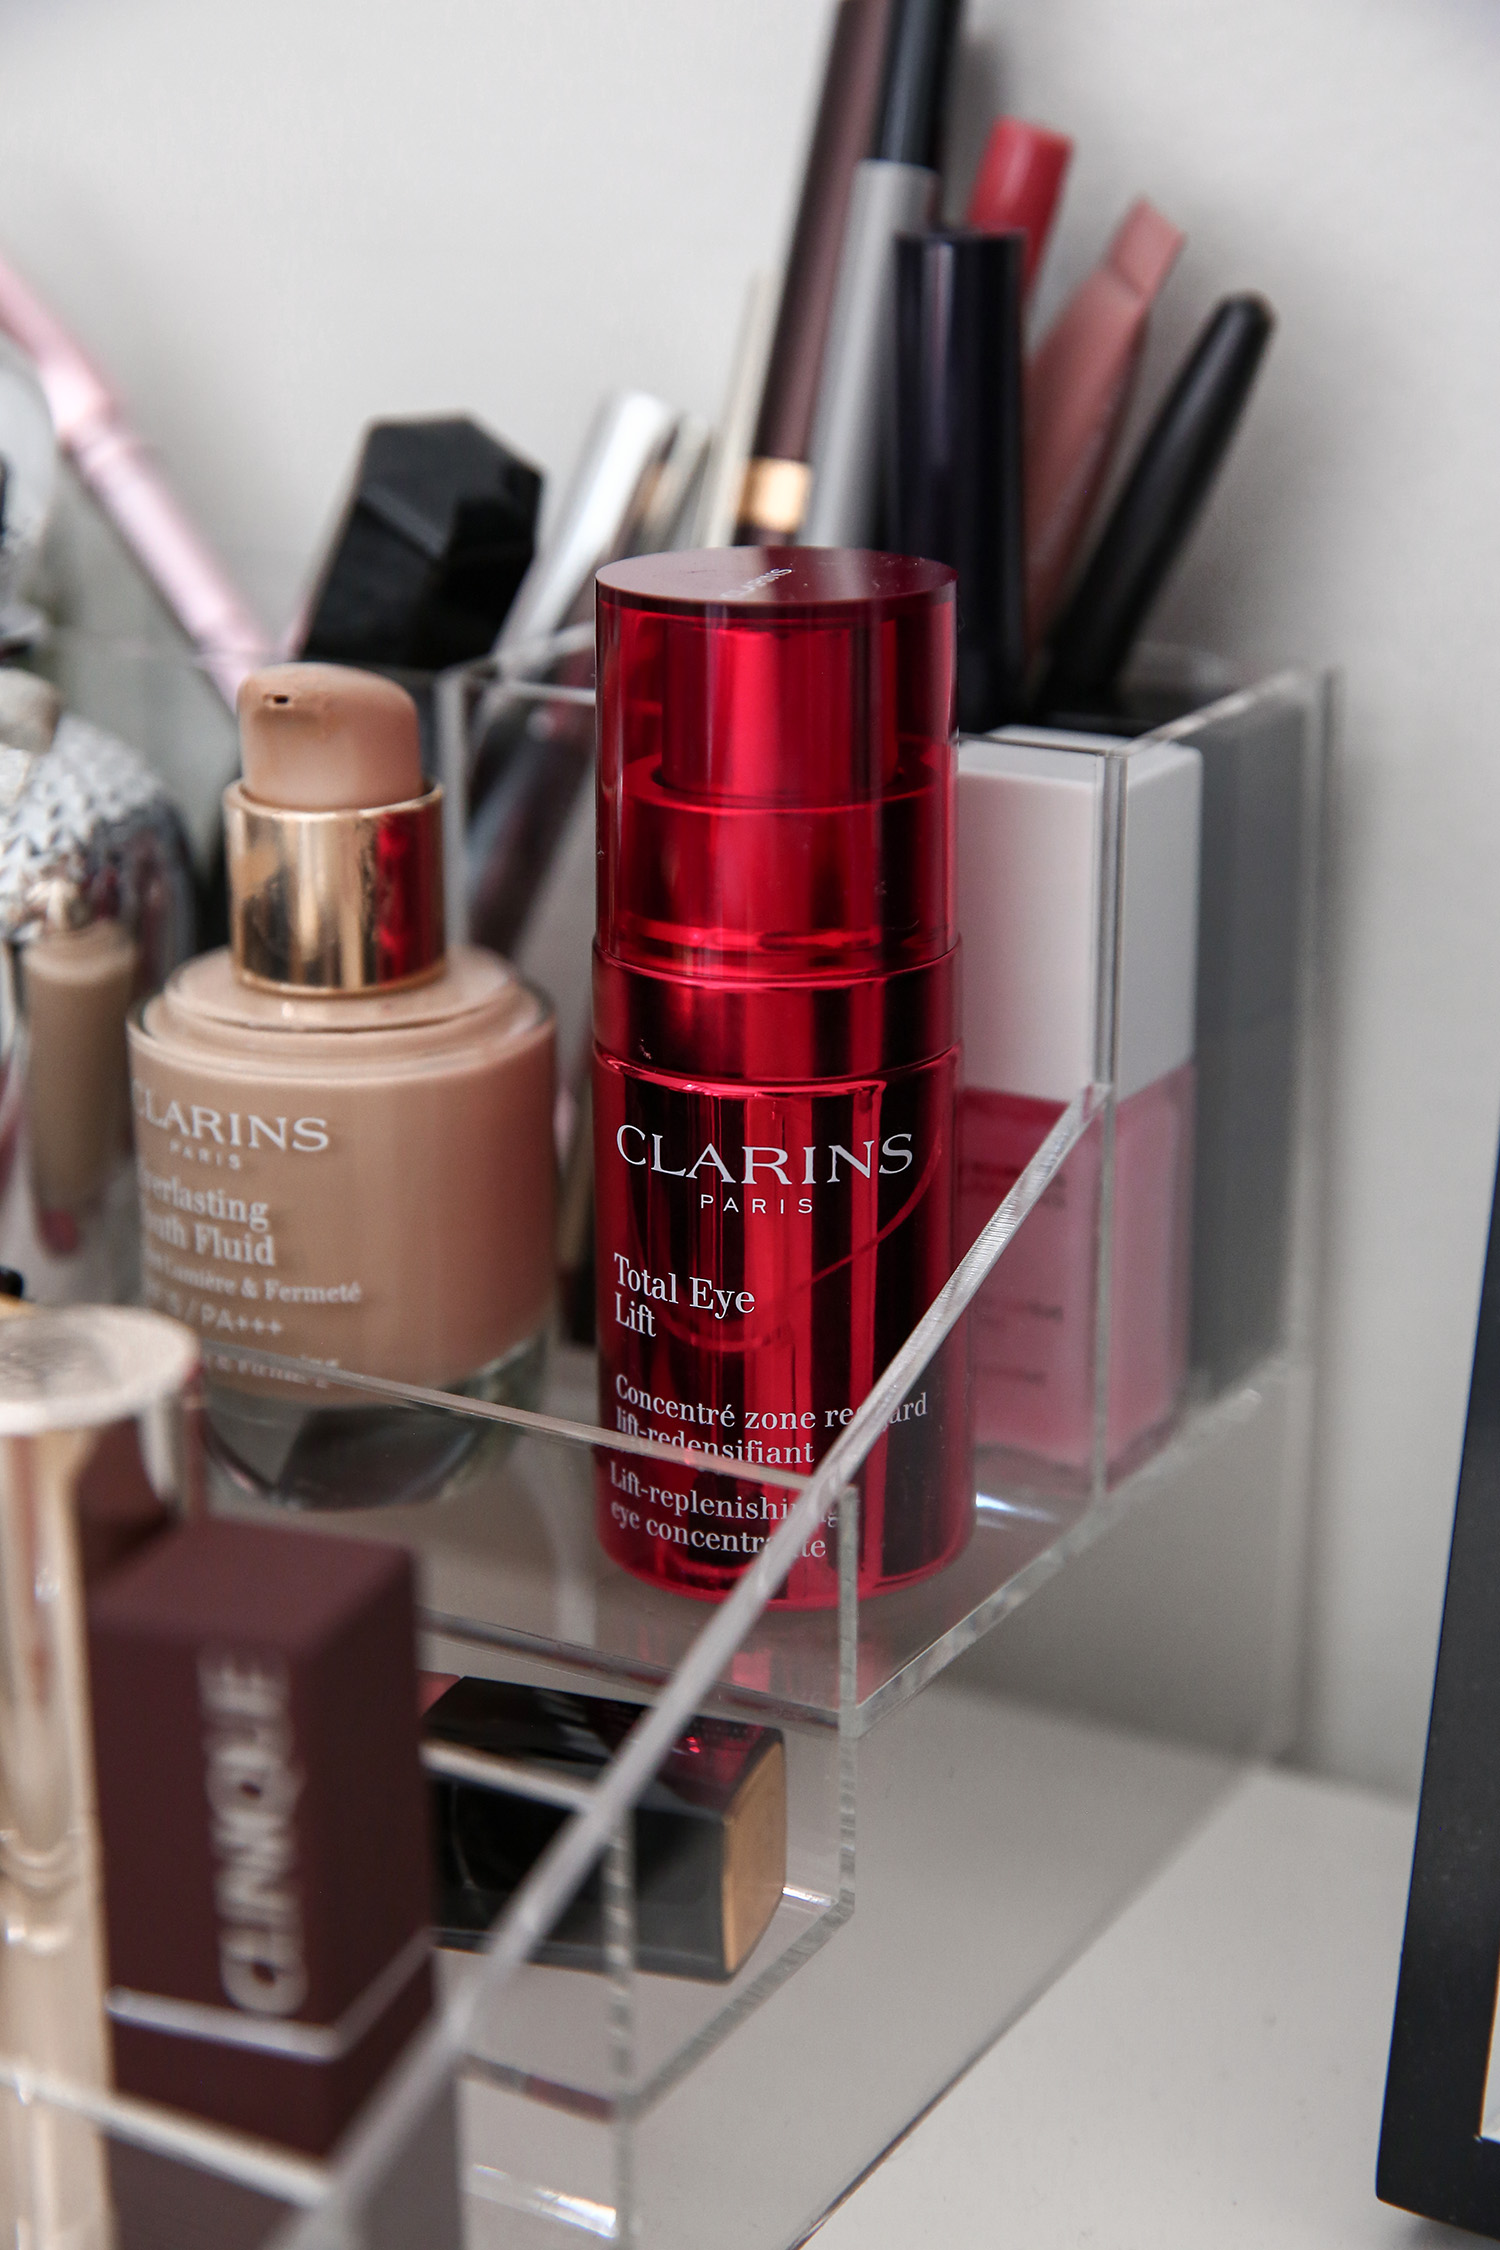 Clarins Total Eye Lift Review